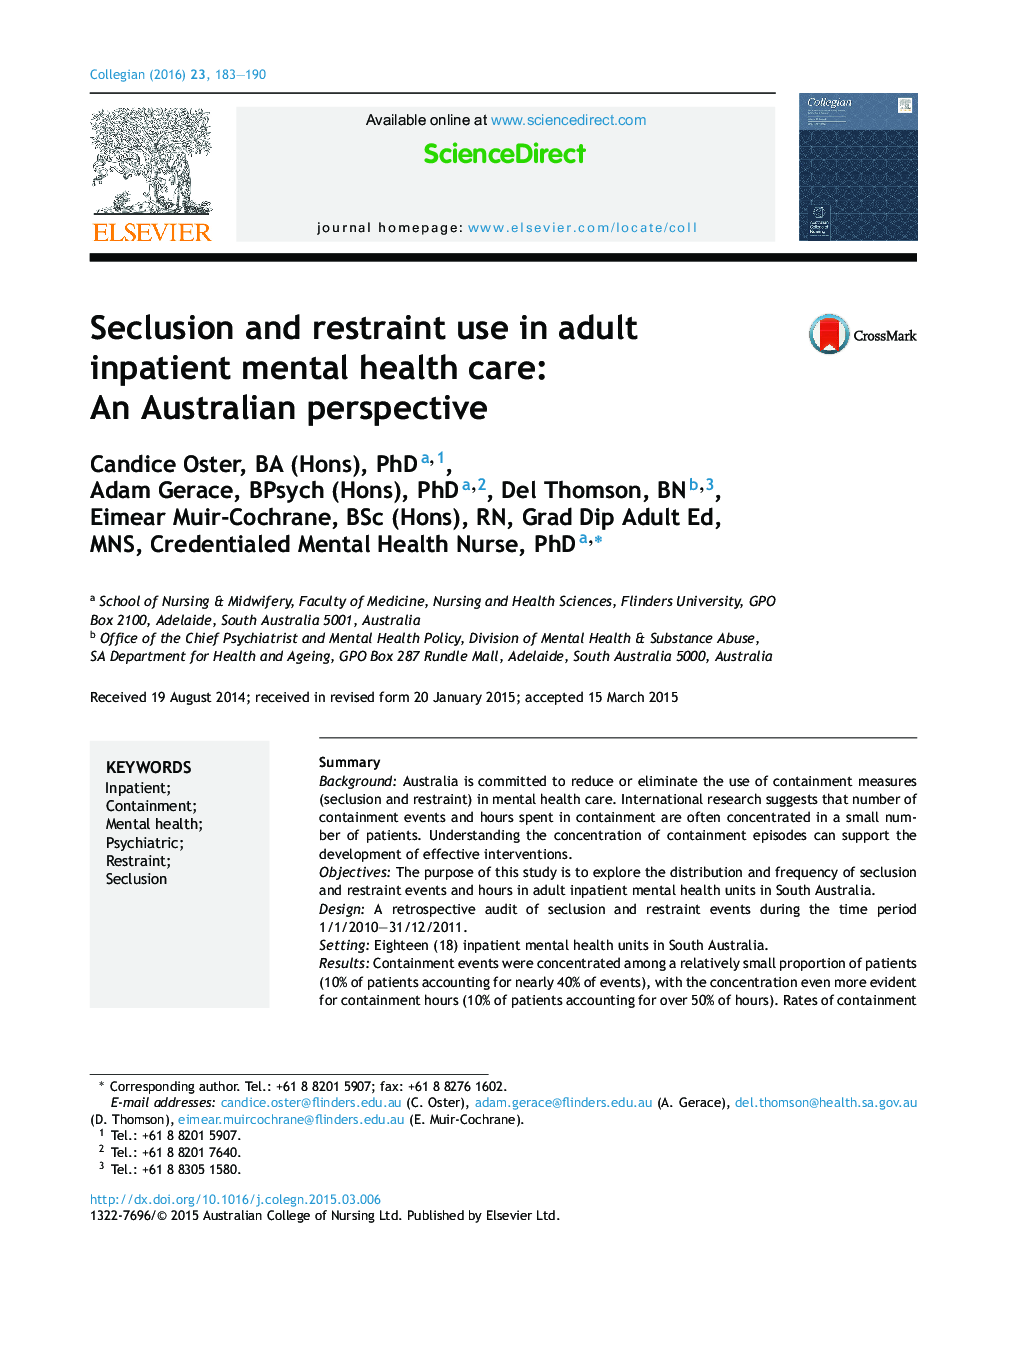 Seclusion and restraint use in adult inpatient mental health care: An Australian perspective